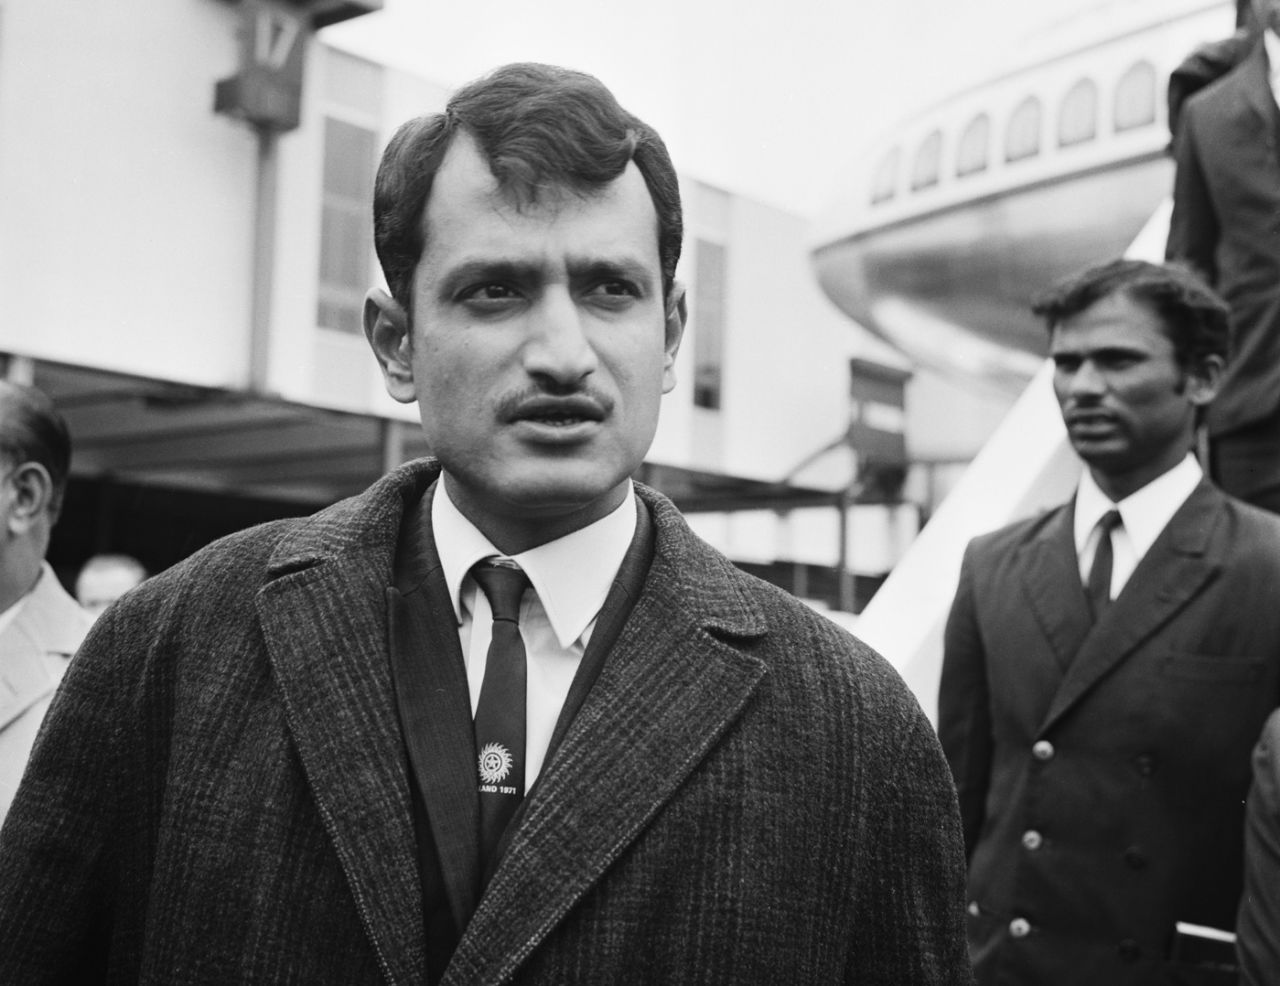 Ajit Wadekar and the Indian squad arrrive in London for the tour of England, June 18, 1971